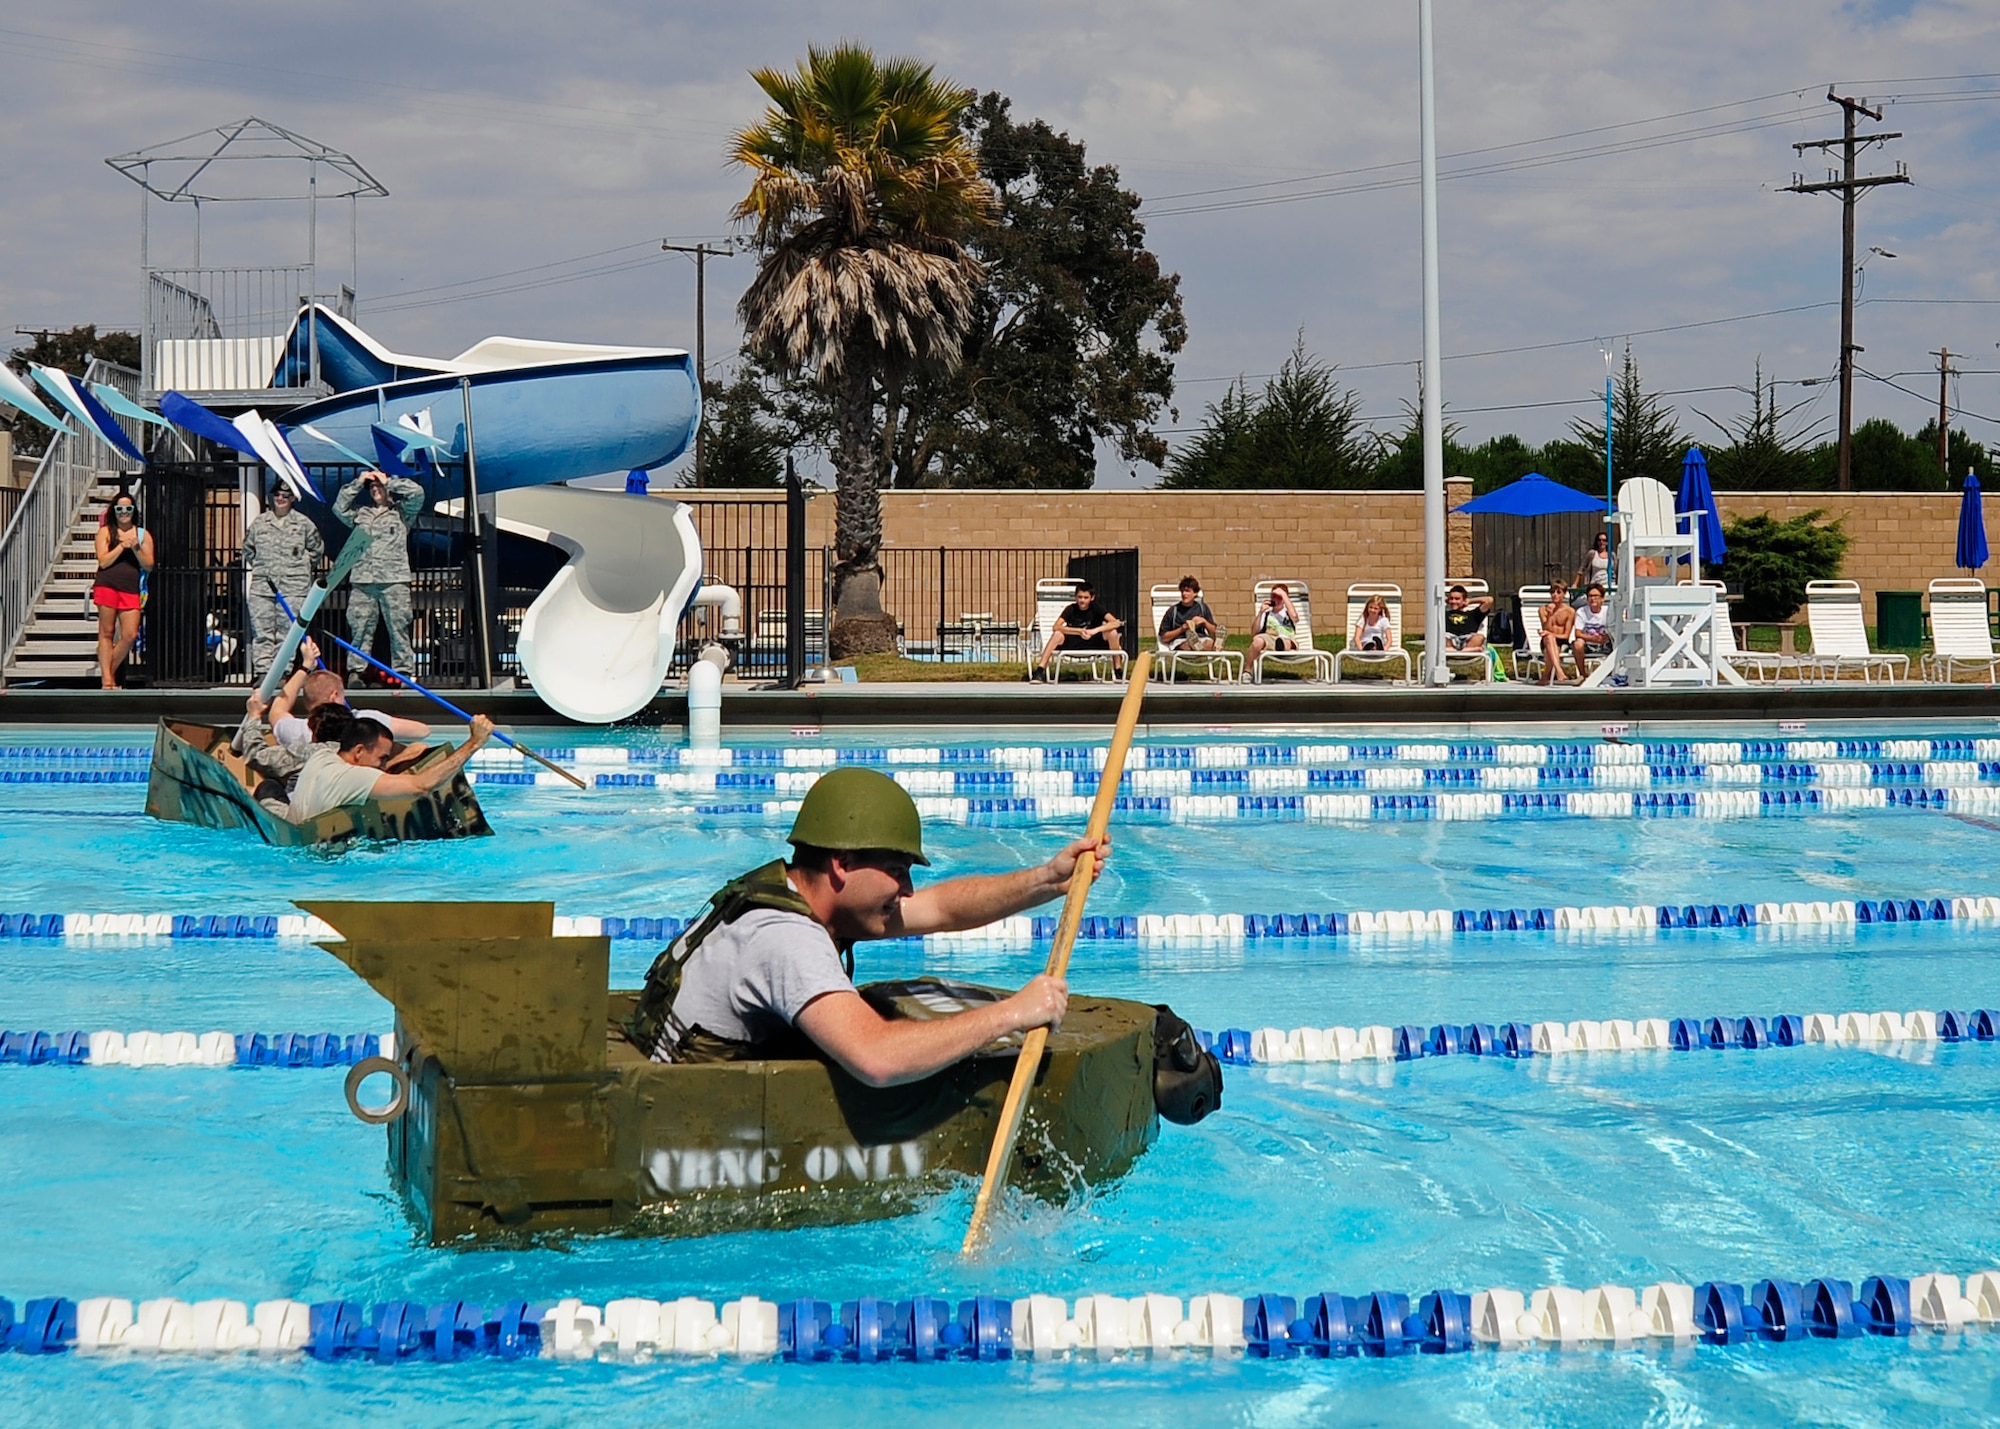 VANDENBERG AIR FORCE BASE, Calif. -- Airman 1st Class Tyler Little, a 30th Civil Engineer Squadron readiness and emergency management apprentice, rows his way to an early lead and the win during the cardboard regatta event for sports day here Friday, August 17, 2012. Sports day is organized by the 30th Force Support Squadron Fitness Center staff and offers squadrons and organizational teams a chance to compete in a variety of sporting events throughout the day. The 30th Civil Engineer Squadron finished the competition with the first place championship. (U.S. Air Force photo/Michael Peterson)